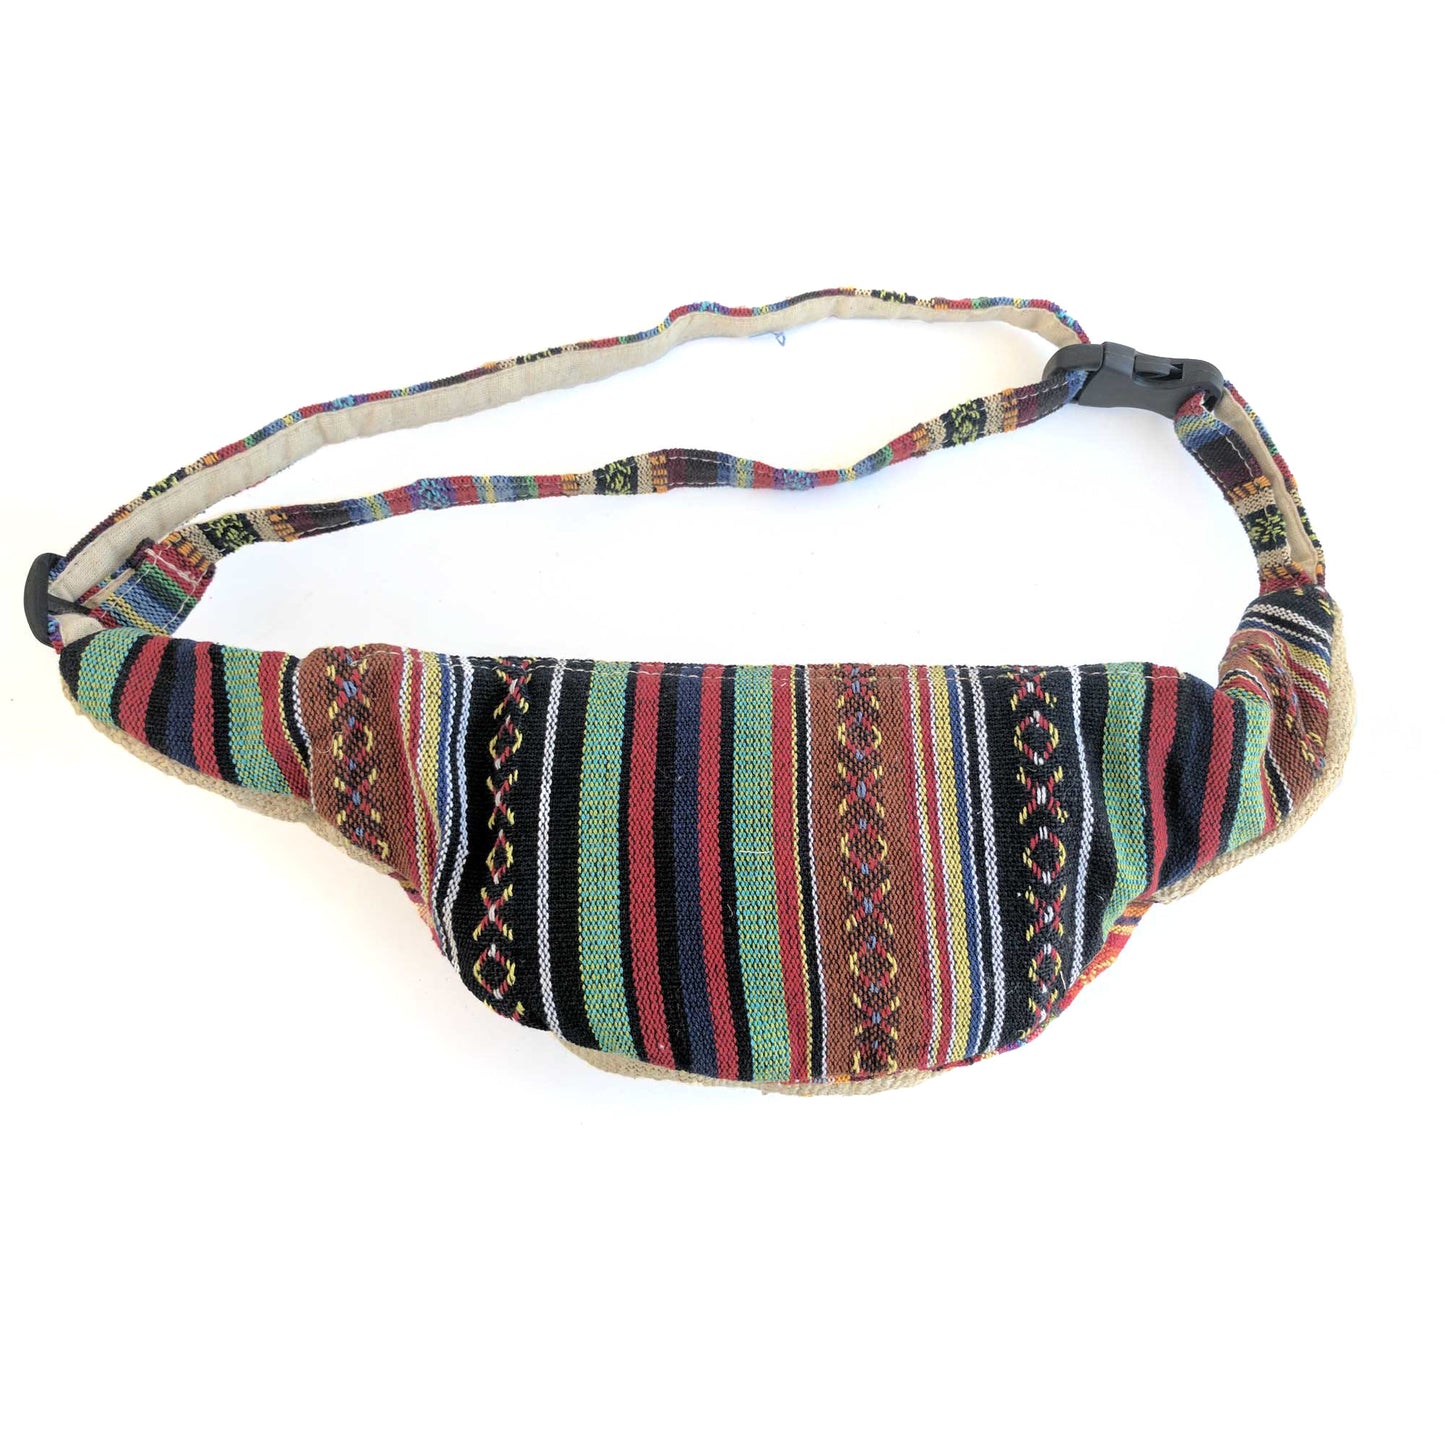 HEMP Fanny Pack made from 100% natural, organic and eco-friendly handwoven HEMP